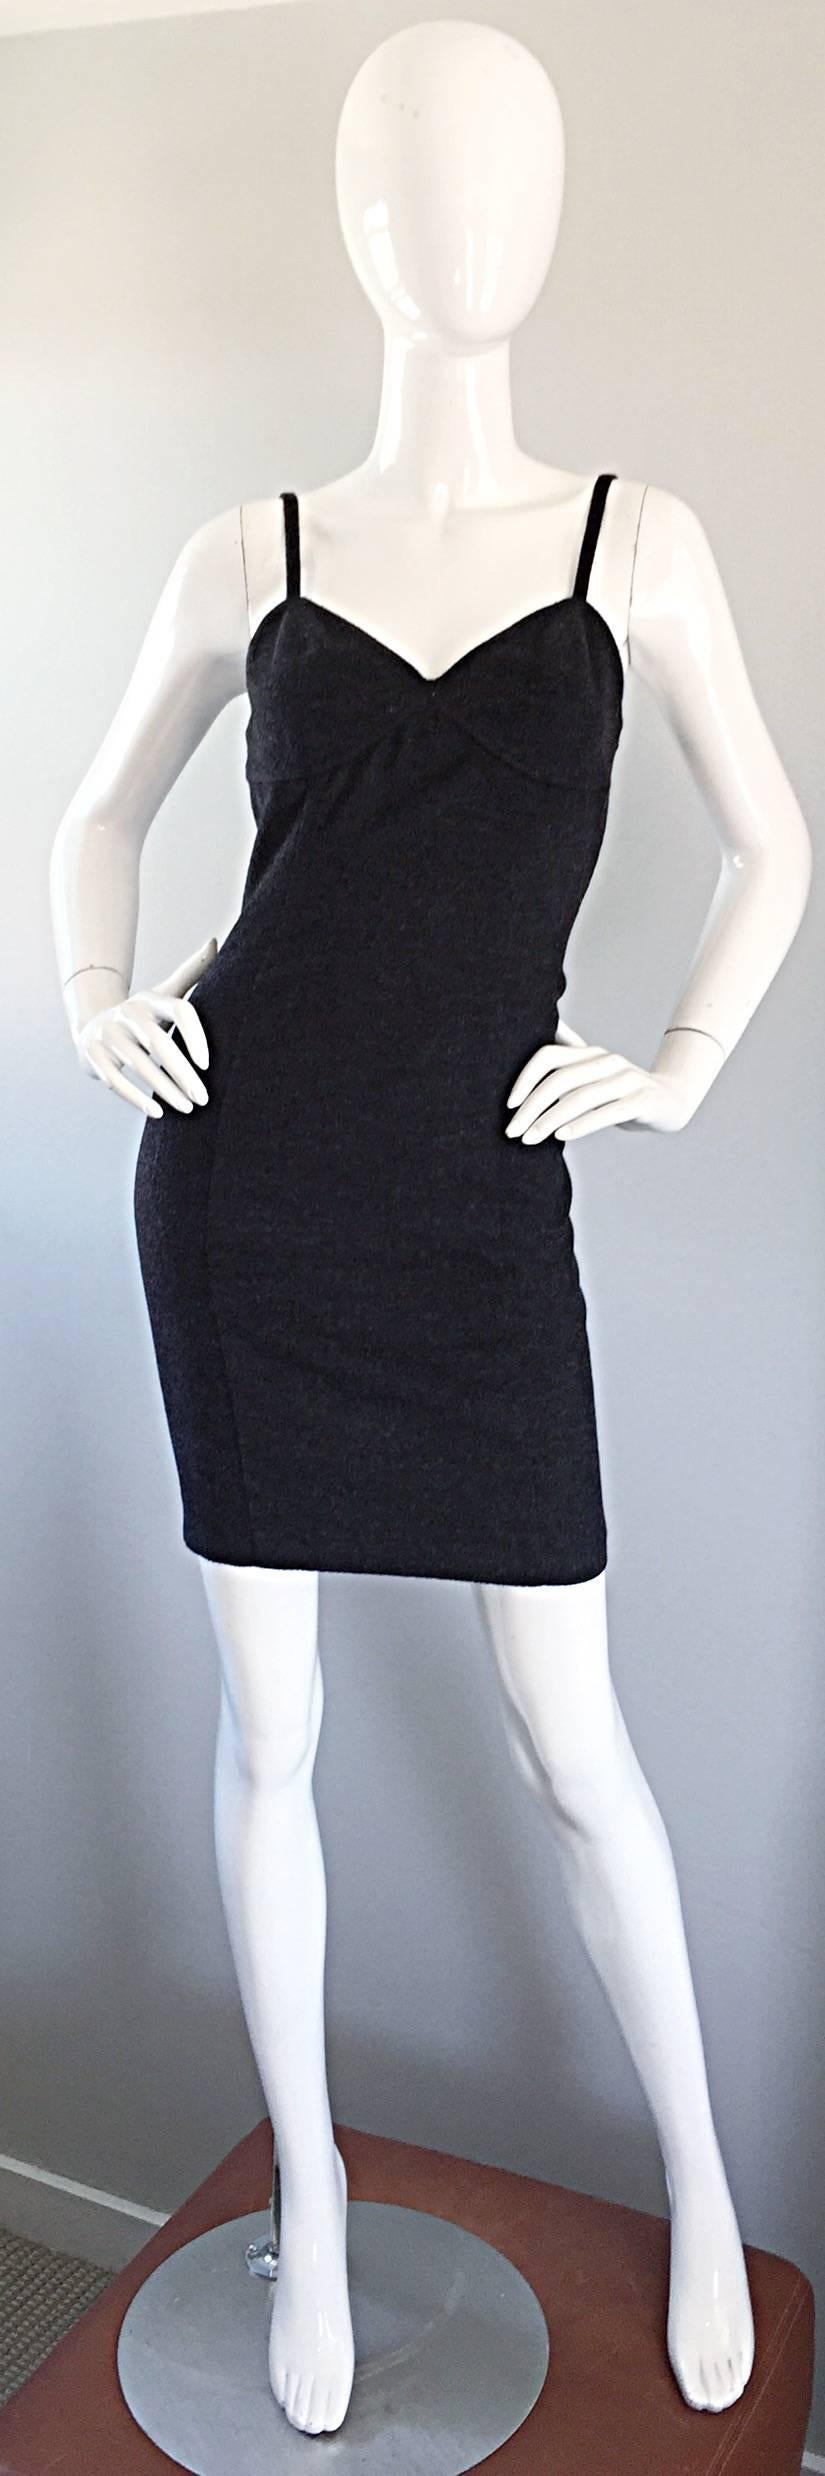 Sexy yet sophisticated vintage MICHAEL KORS early 1990s charcoal gray sleeveless bodcon dress! The perfect alternative to the little black dress! This flattering number really flatters the body, and hugs the curves in all the right places, which